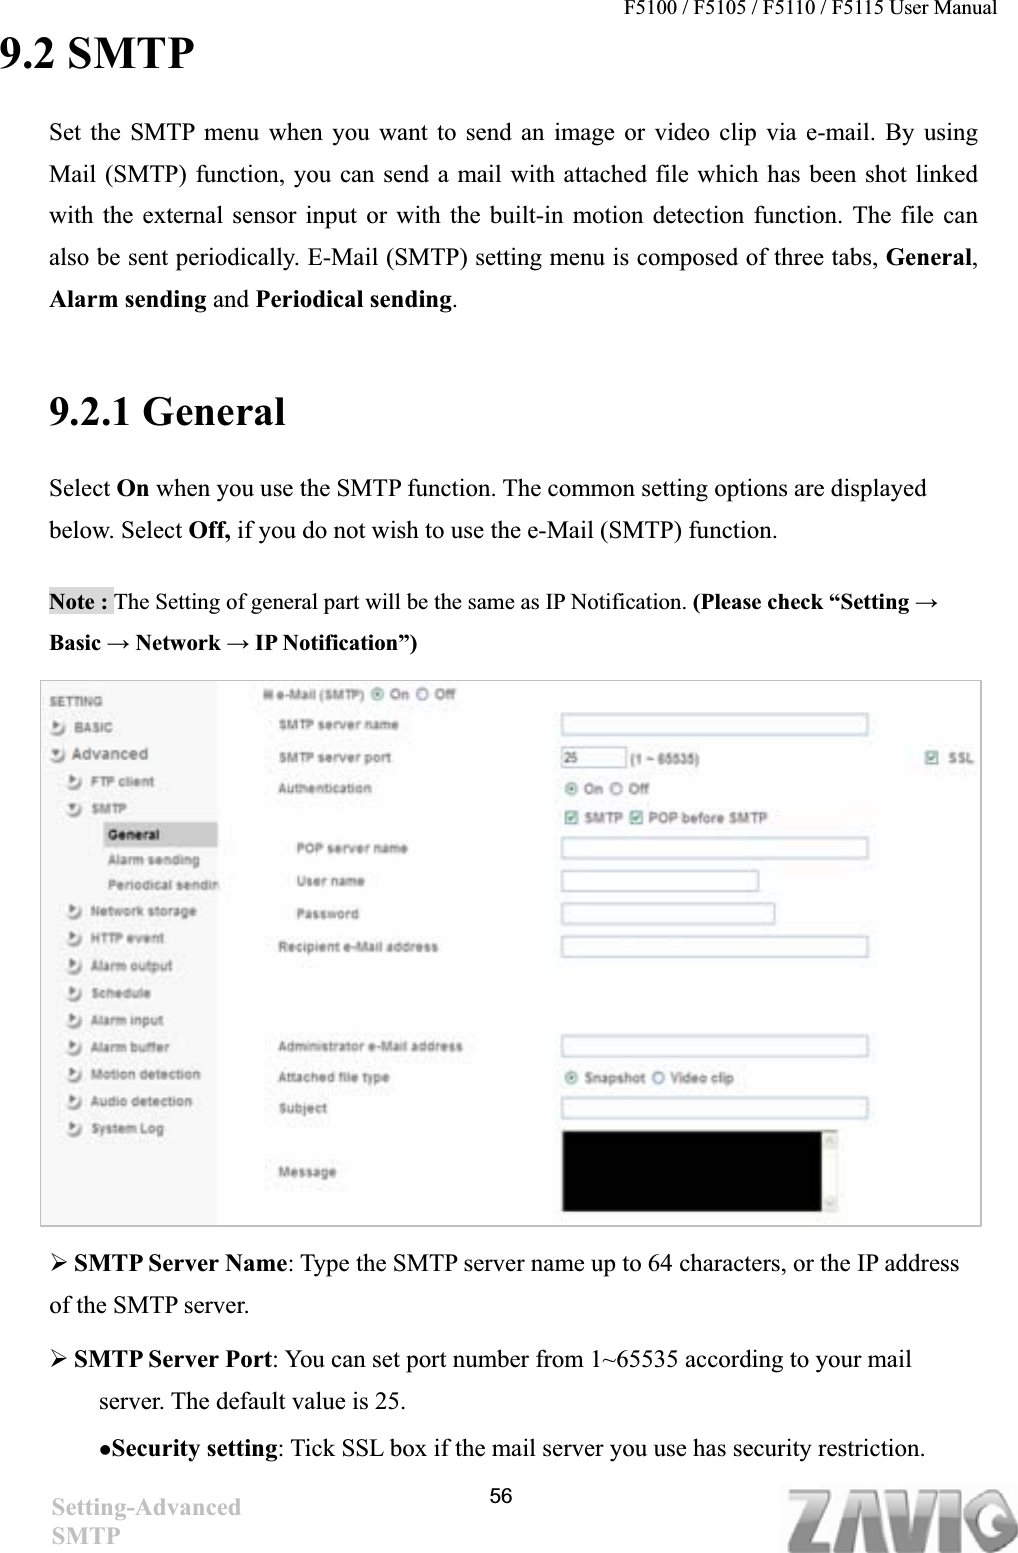 F5100 / F5105 / F5110 / F5115 User Manual   9.2 SMTP Set the SMTP menu when you want to send an image or video clip via e-mail. By using Mail (SMTP) function, you can send a mail with attached file which has been shot linked with the external sensor input or with the built-in motion detection function. The file can also be sent periodically. E-Mail (SMTP) setting menu is composed of three tabs, General,Alarm sending and Periodical sending.9.2.1 General   Select On when you use the SMTP function. The common setting options are displayed below. Select Off, if you do not wish to use the e-Mail (SMTP) function. Note : The Setting of general part will be the same as IP Notification. (Please check “Setting ĺBasic ĺ Network ĺ IP Notification”) ¾SMTP Server Name: Type the SMTP server name up to 64 characters, or the IP address of the SMTP server. ¾SMTP Server Port: You can set port number from 1~65535 according to your mail server. The default value is 25. zSecurity setting: Tick SSL box if the mail server you use has security restriction. 56Setting-AdvancedSMTP